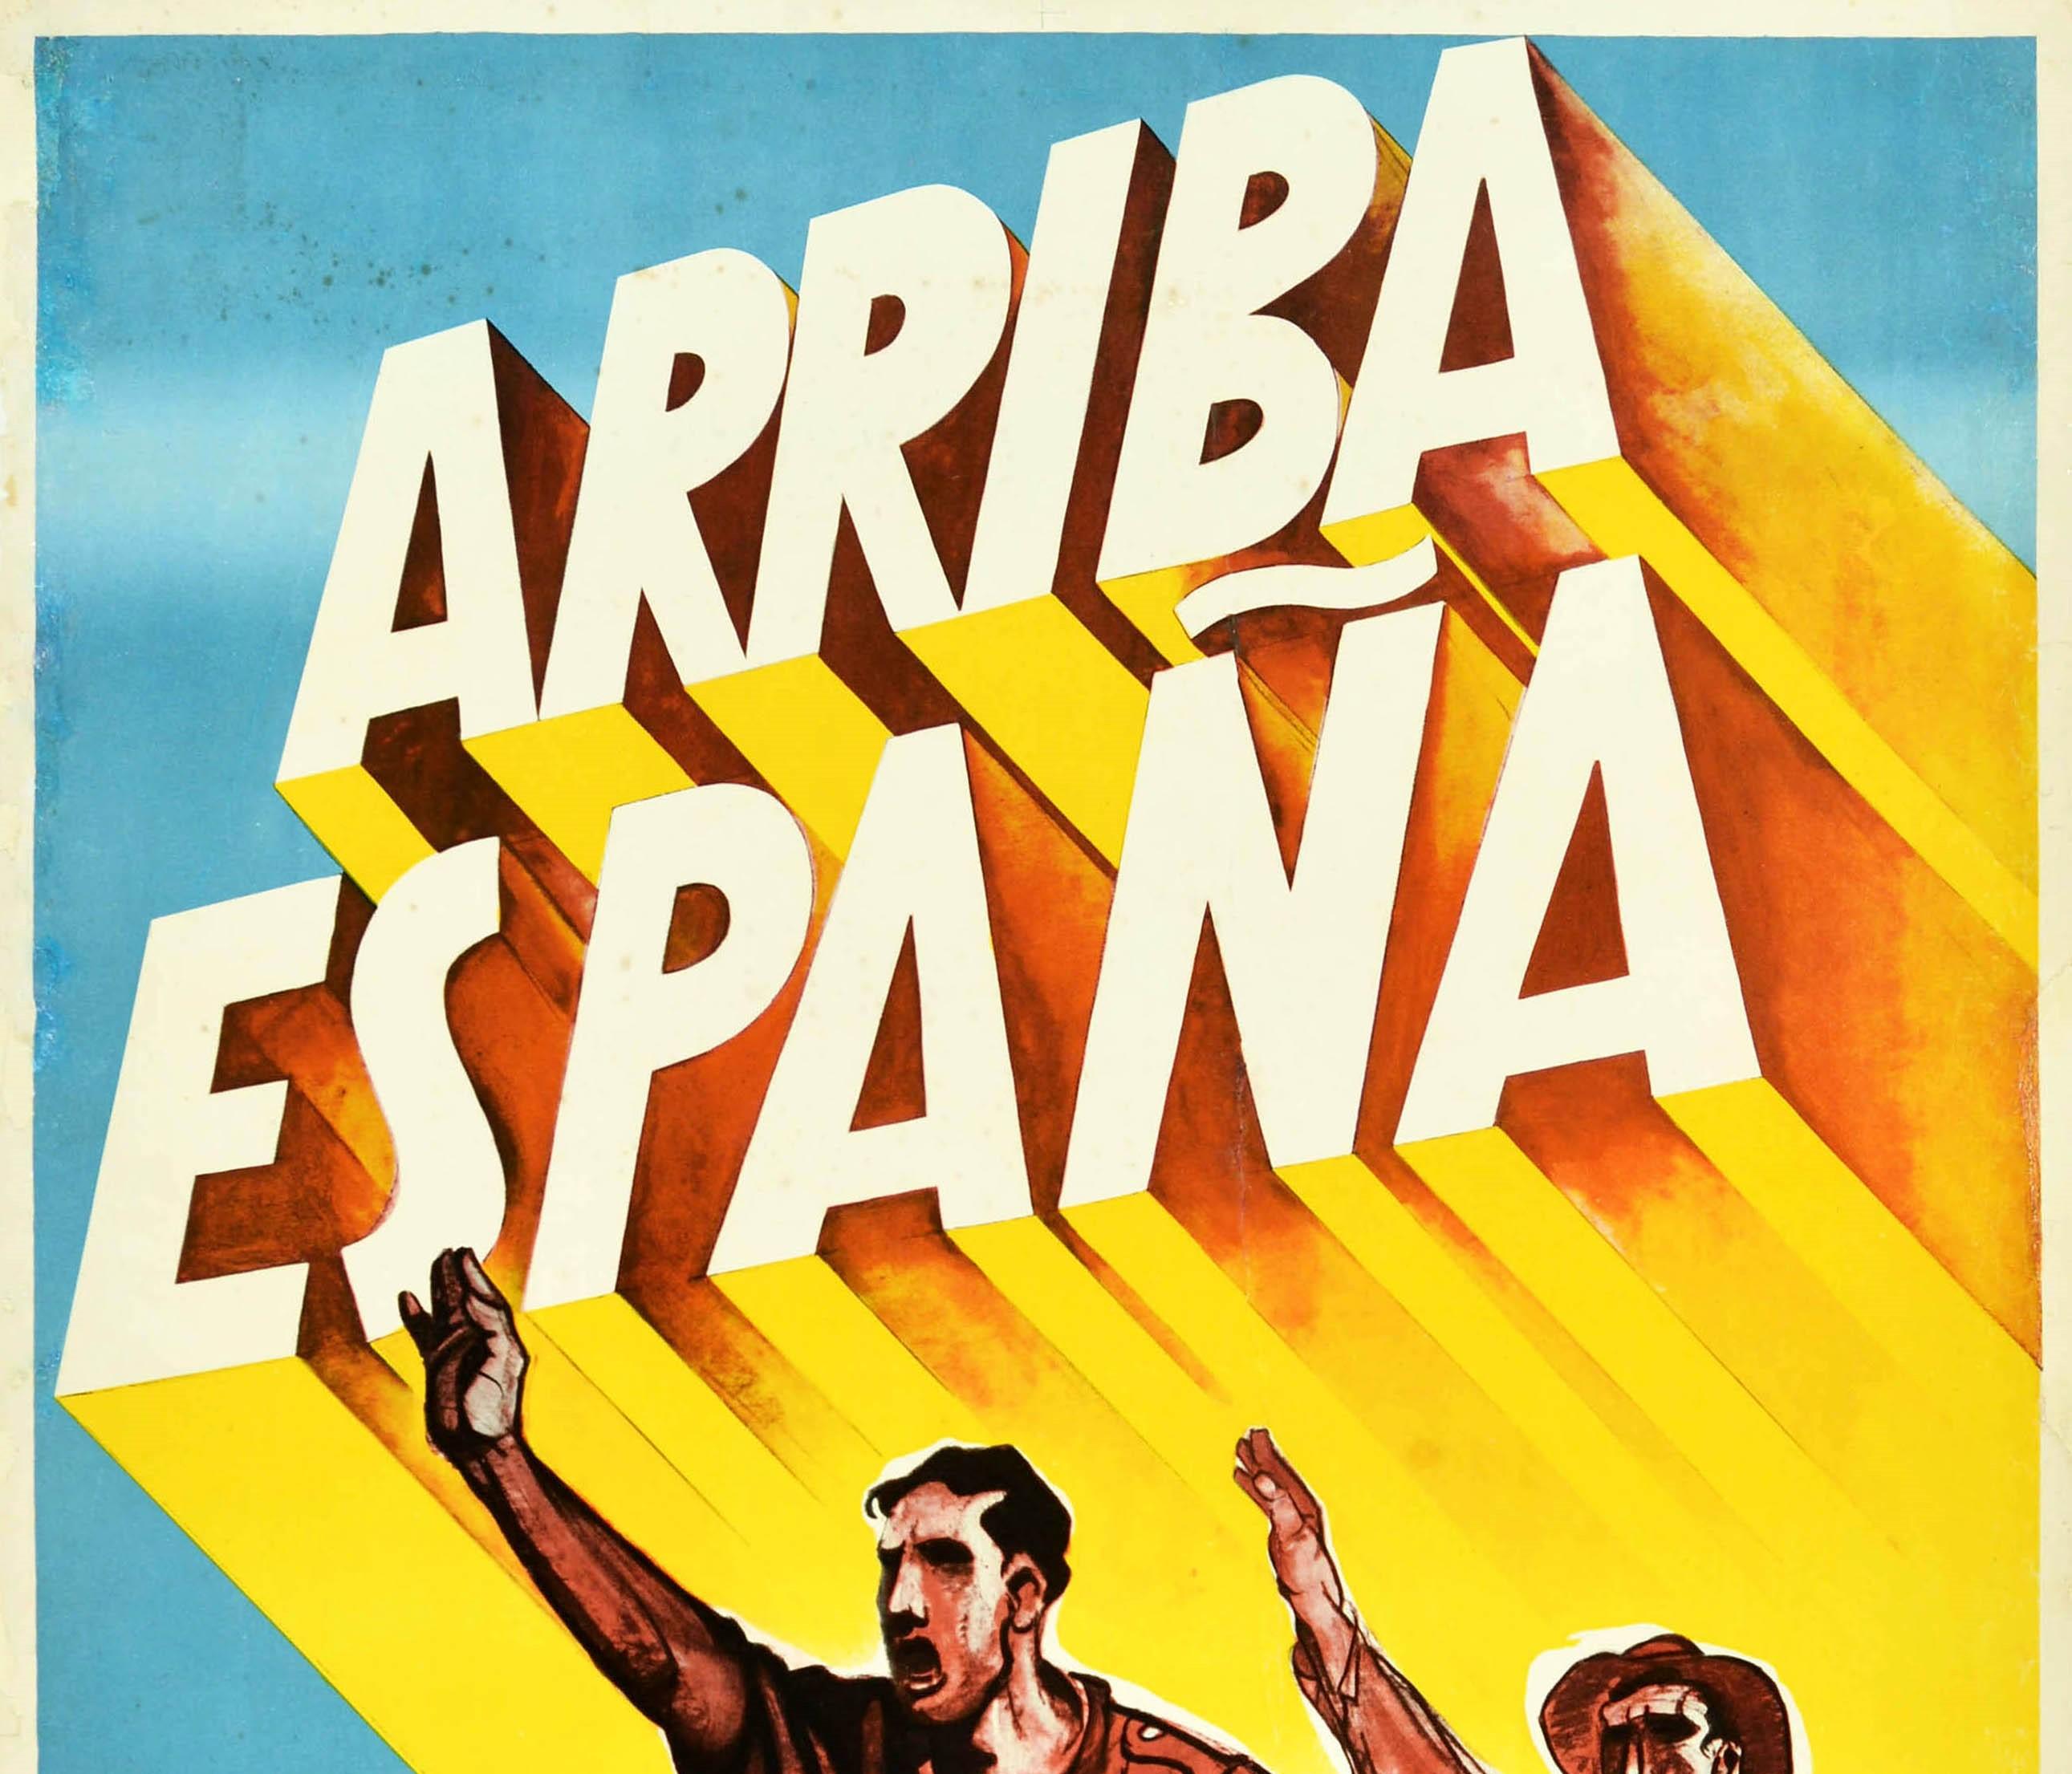 Original vintage Spanish Civil War (1936-1939) propaganda poster - Arriba Espana / Go Spain - featuring soldiers, workers, farmers, women and children rising up and marching forward below the dramatic bold lettering. Large size. Fair condition,